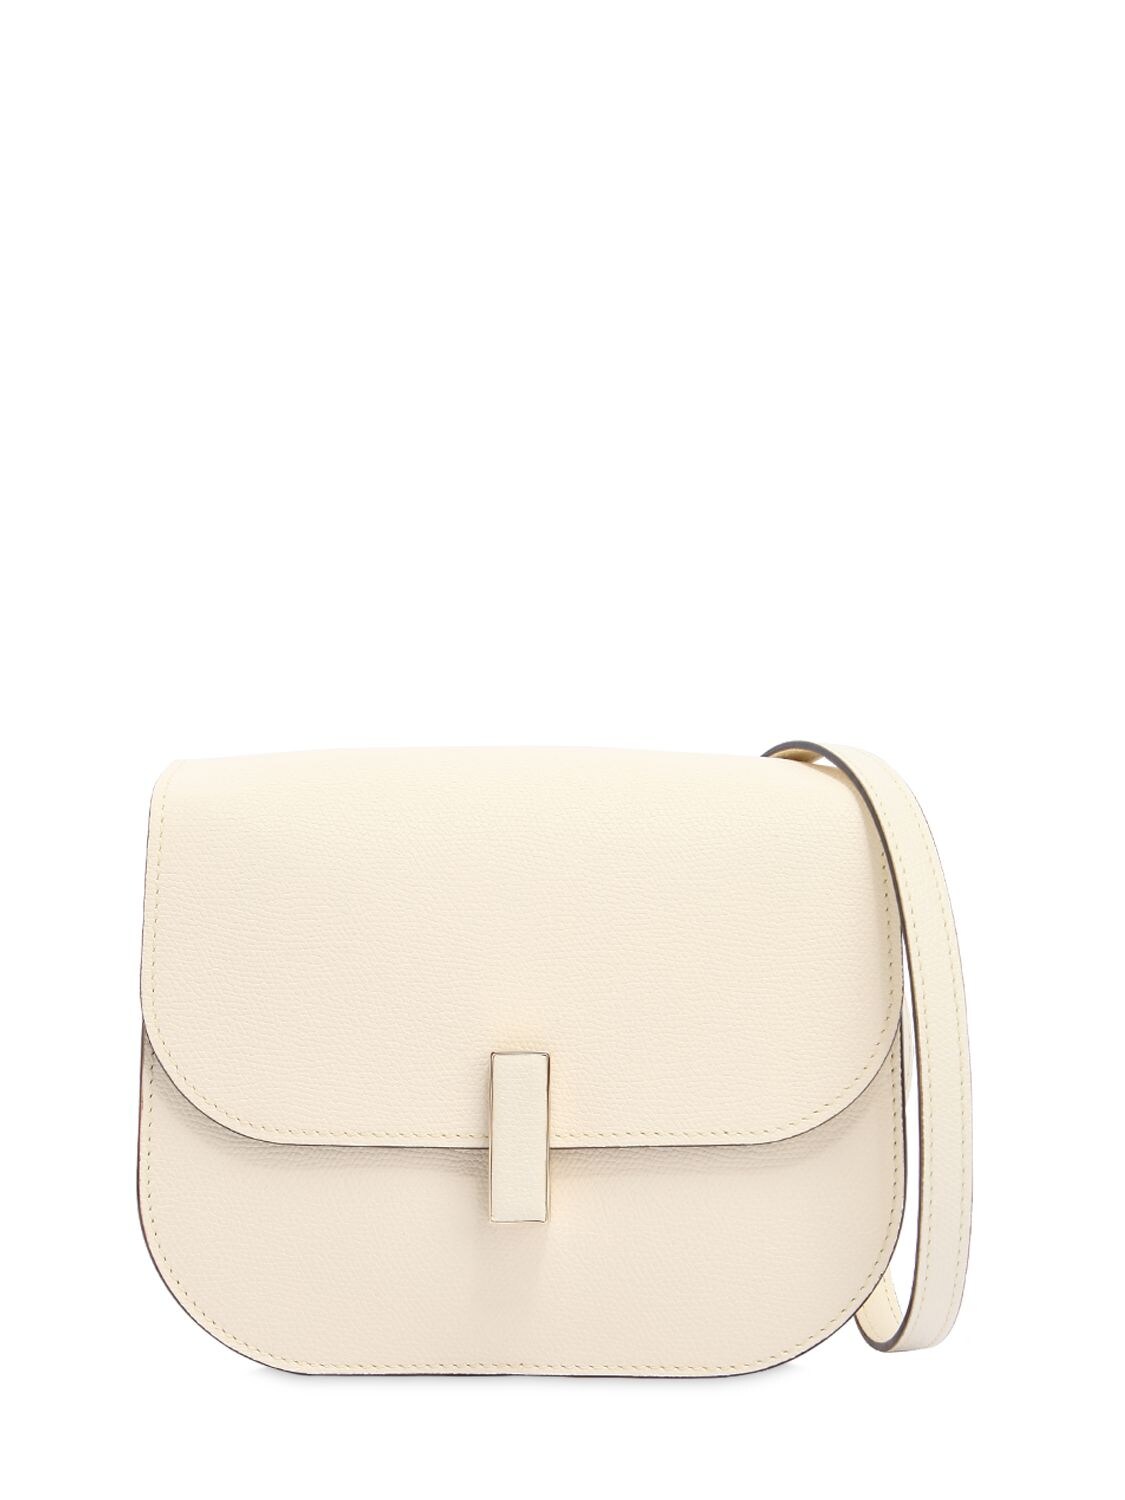 Valextra Mini Iside Grained Leather Shoulder Bag In Pergamena